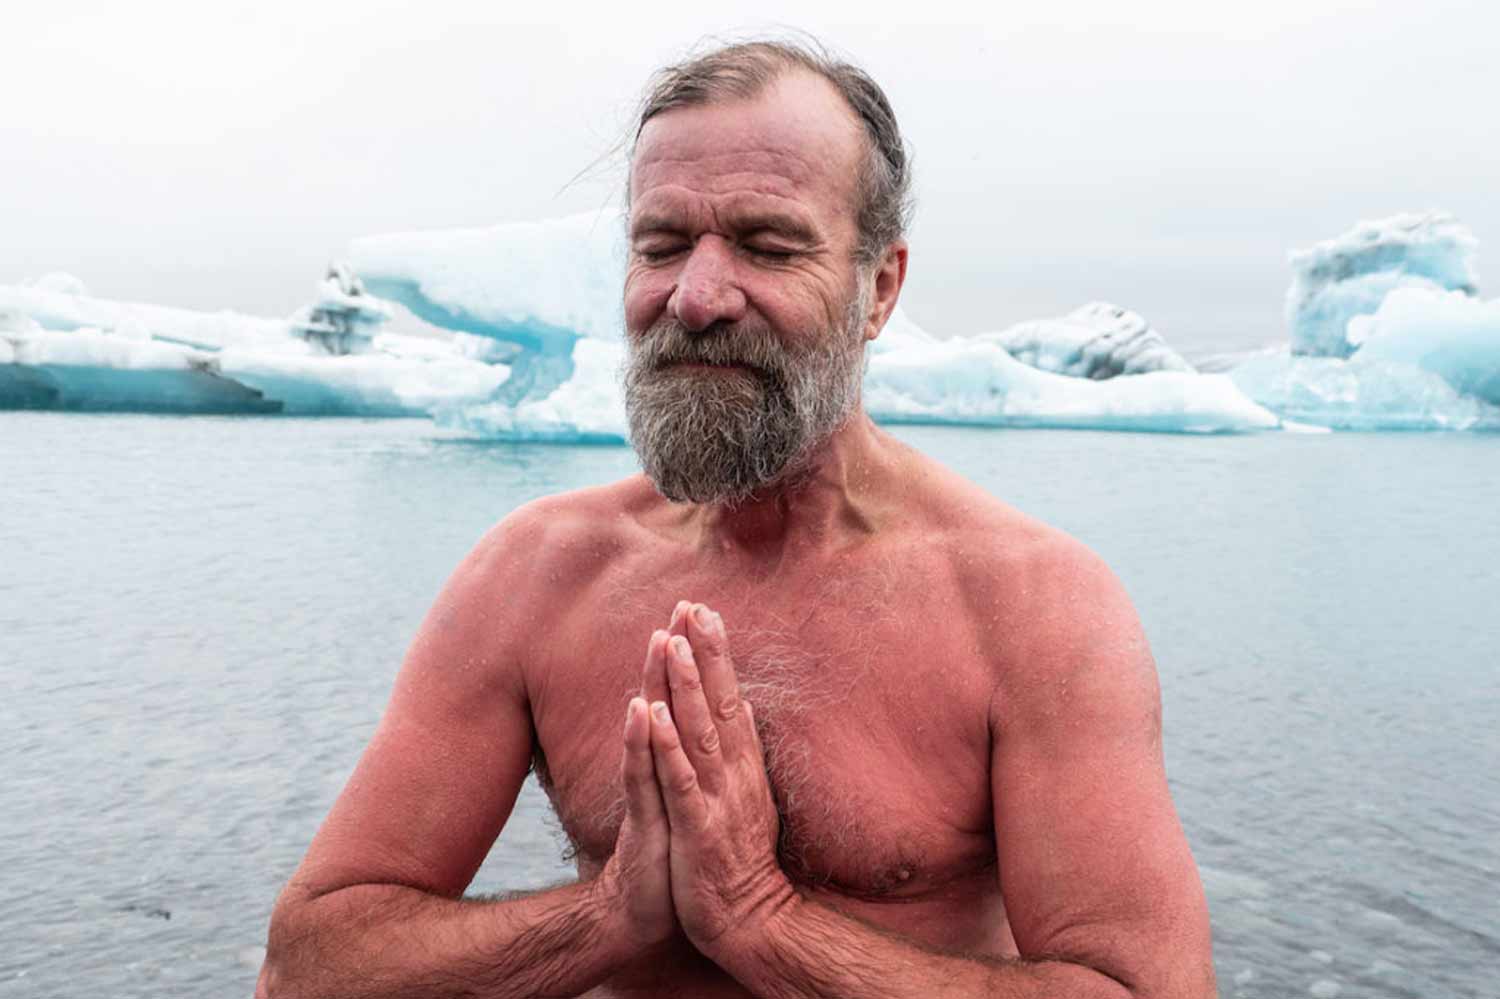 ‘The Iceman’ Wim Hof Trades The North Pole For Noosa